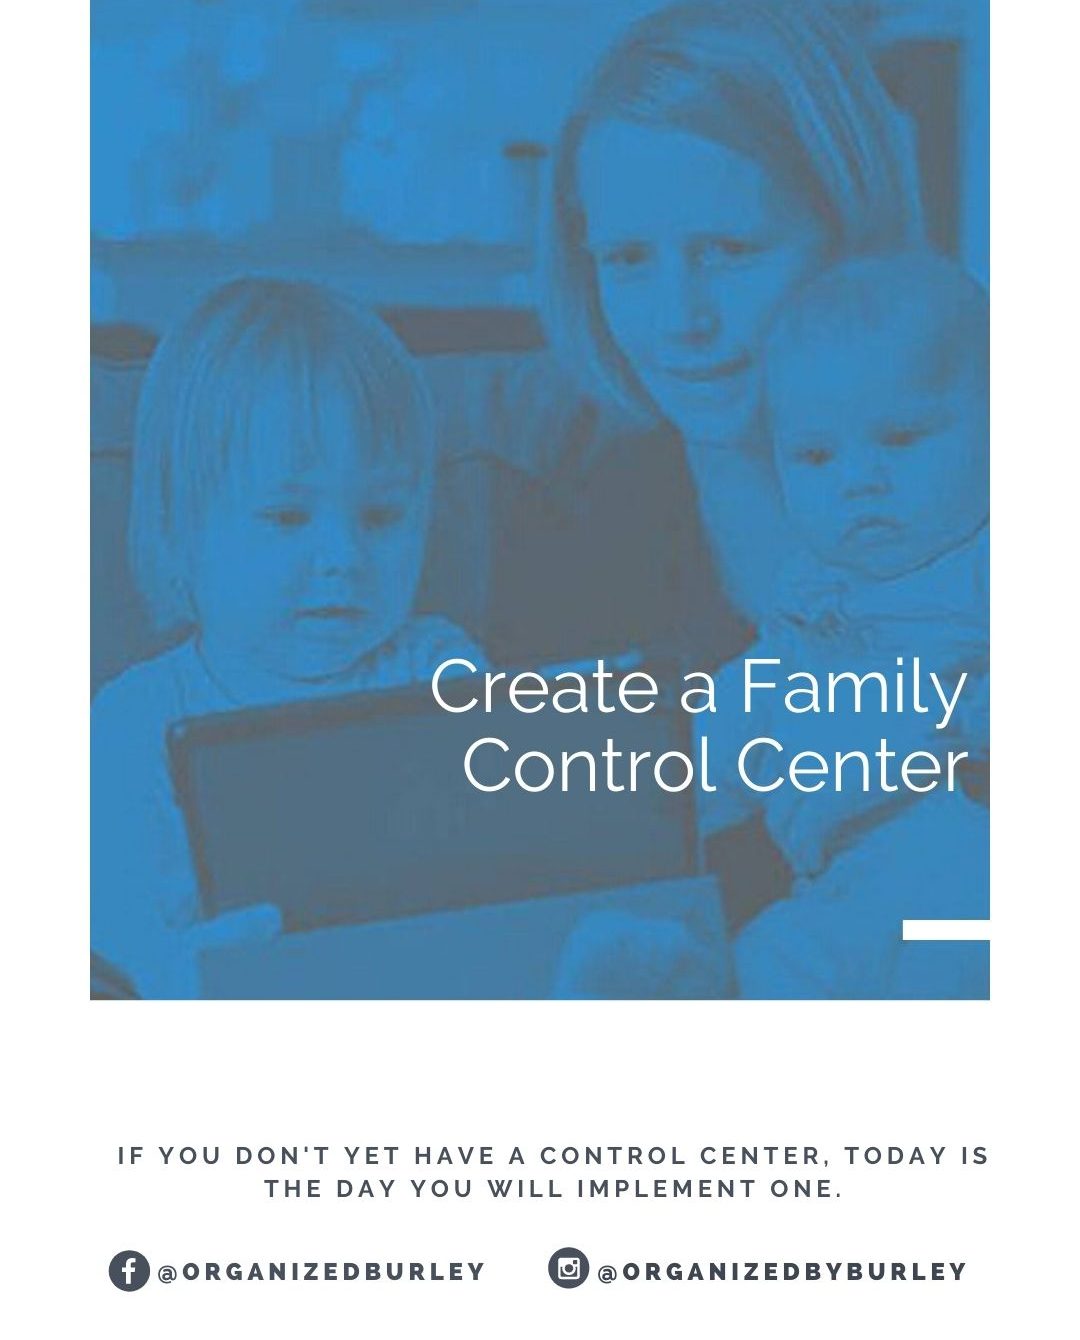 How to Create a Family Control Center